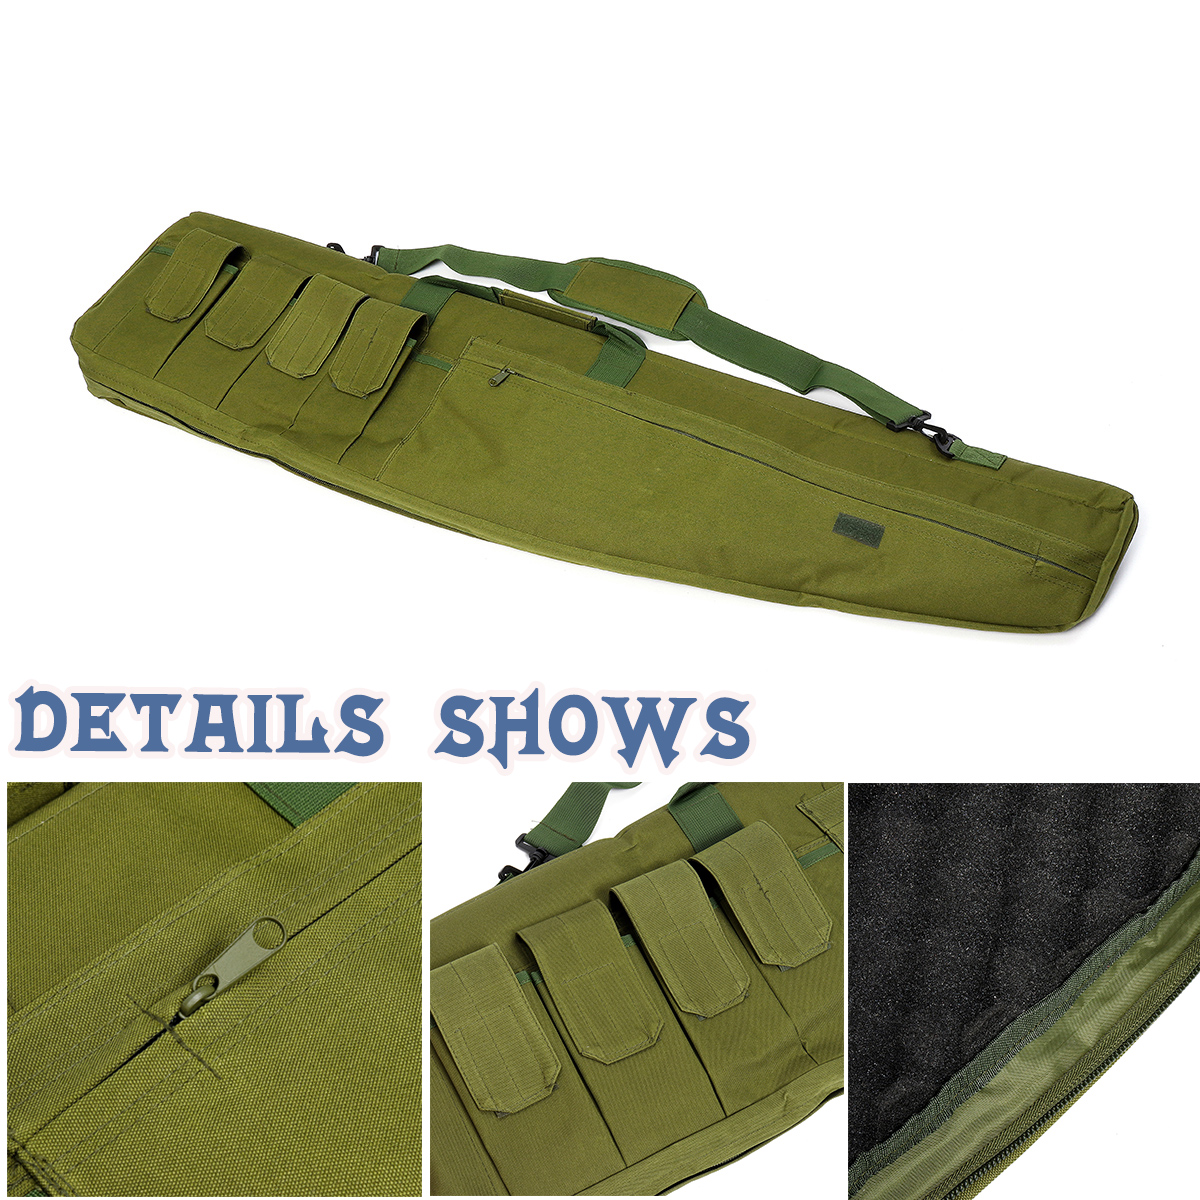 100x25x5cm-Outdoor-Hunting-Tactical-Bag-CS-Airsoft-Case-Tactical-Package-Heavy-Duty-Hunting-Accessor-1519991-3